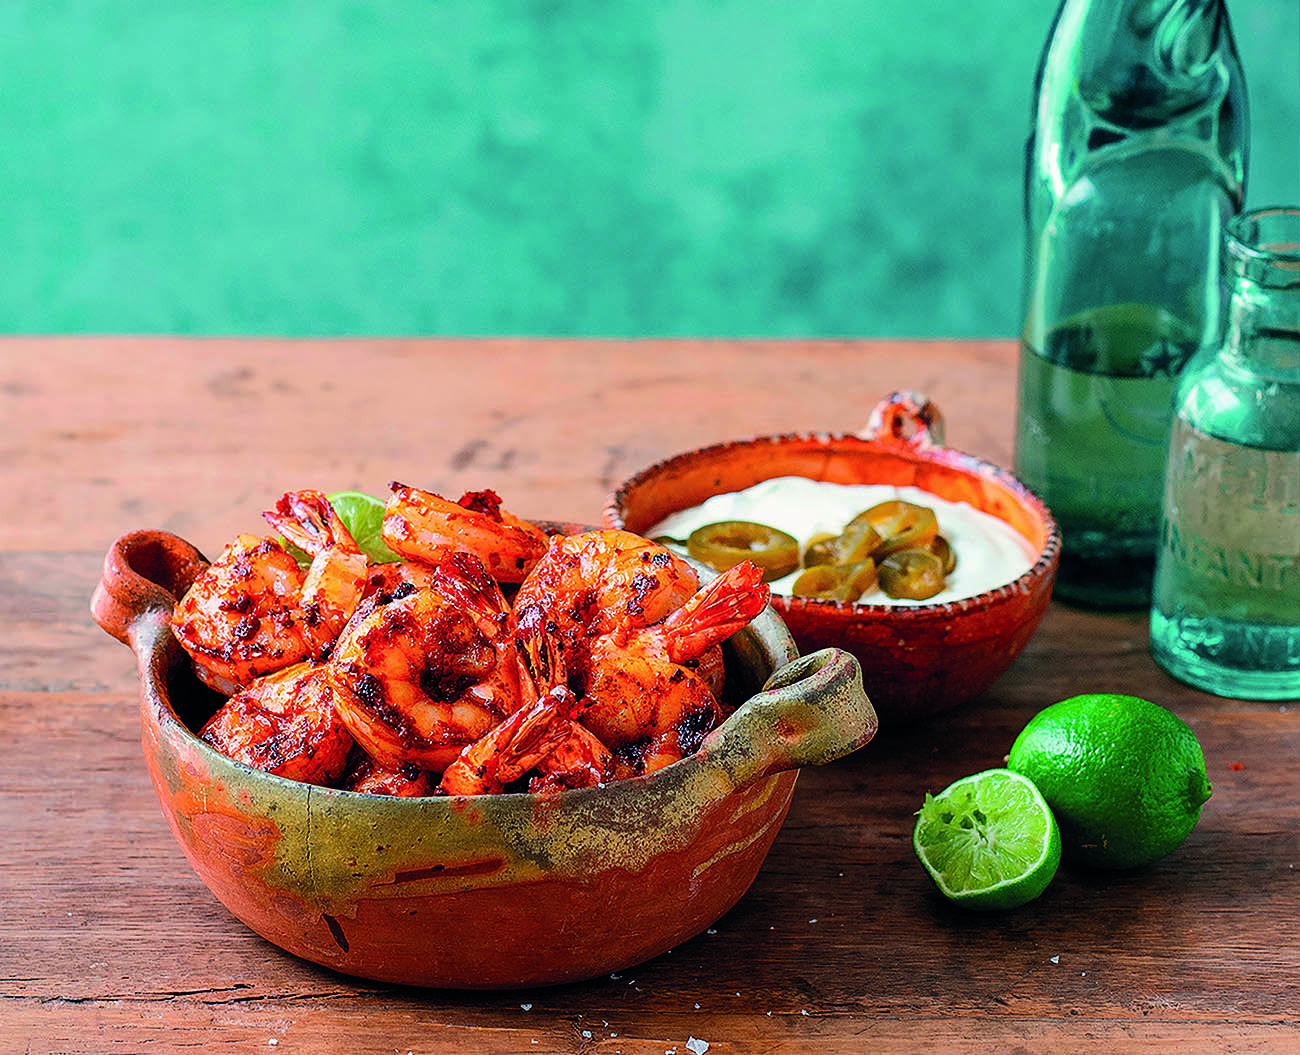 p36 Good living - Mexican Delights - Chipotle Prawns